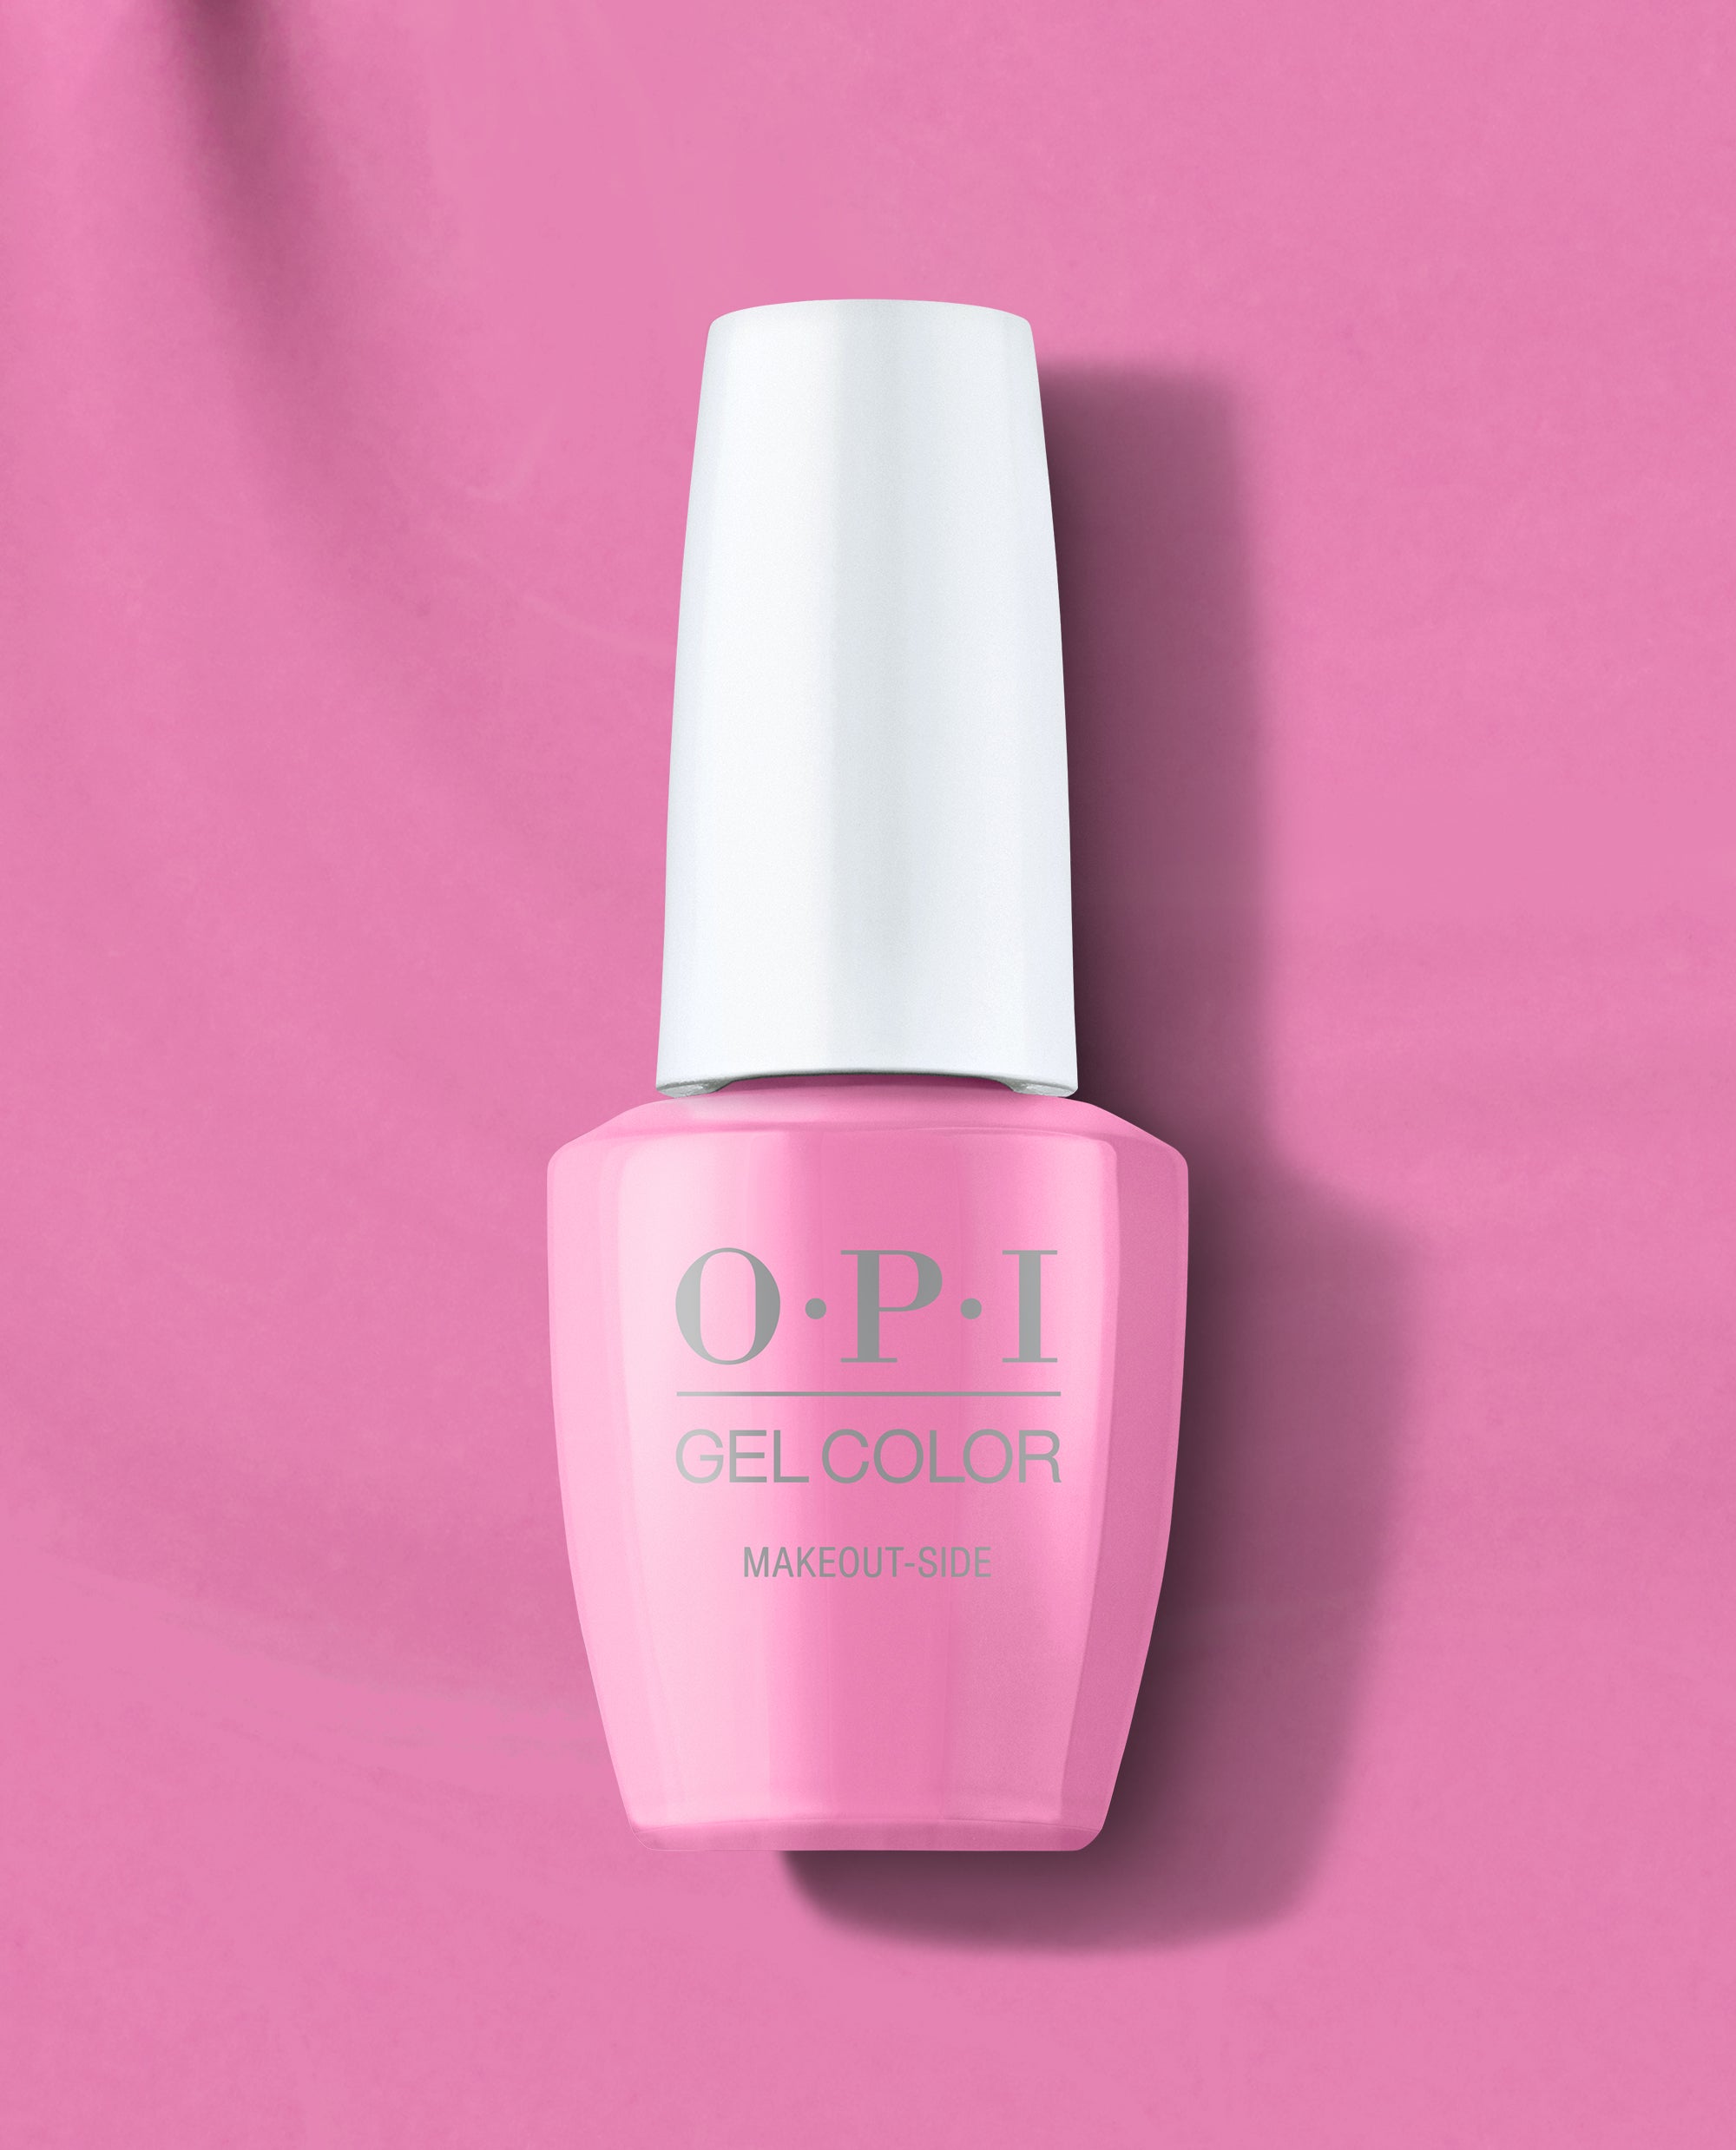 DeBelle Gel Nail Lacquer DeCarnation Blush Pink Nail Polish 8 ml Online in  India, Buy at Best Price from Firstcry.com - 12696329